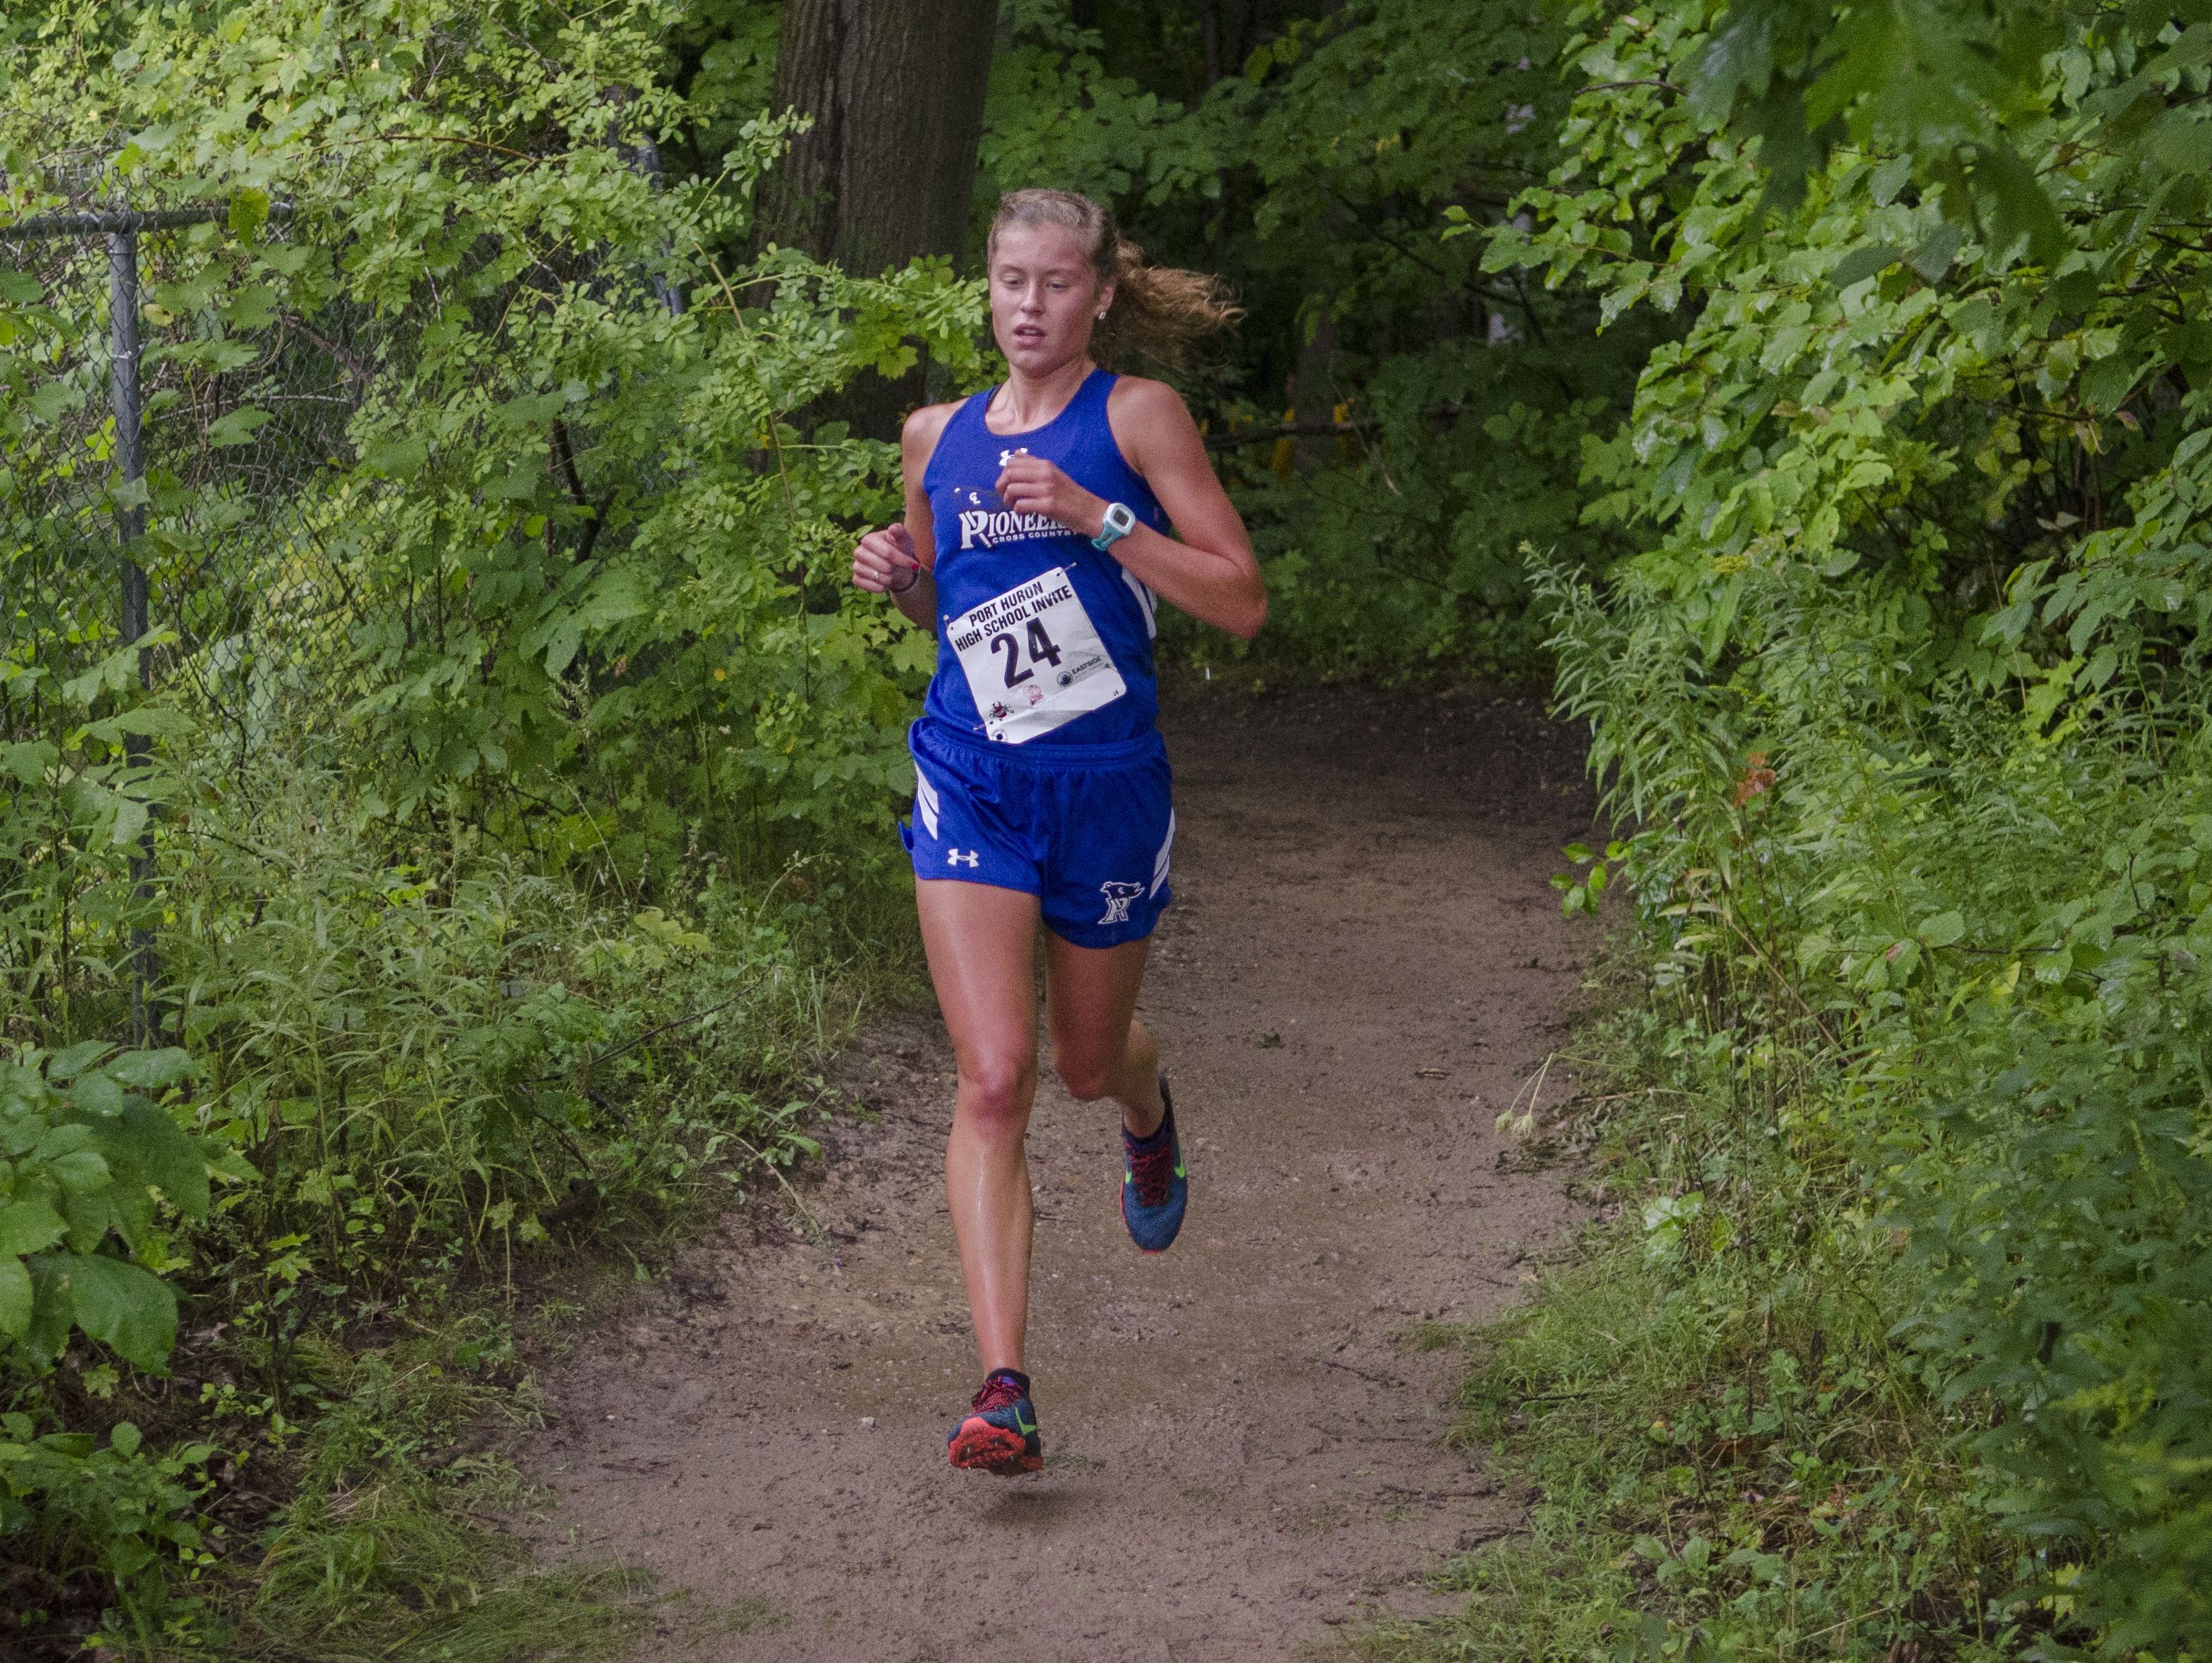 CrosLex's Calli Townsend comes out of the woods at the Port Huron Cross Country Invitational Thursday, Sept. 1, 2016 at Central Middle School. Townsend finished in first place.